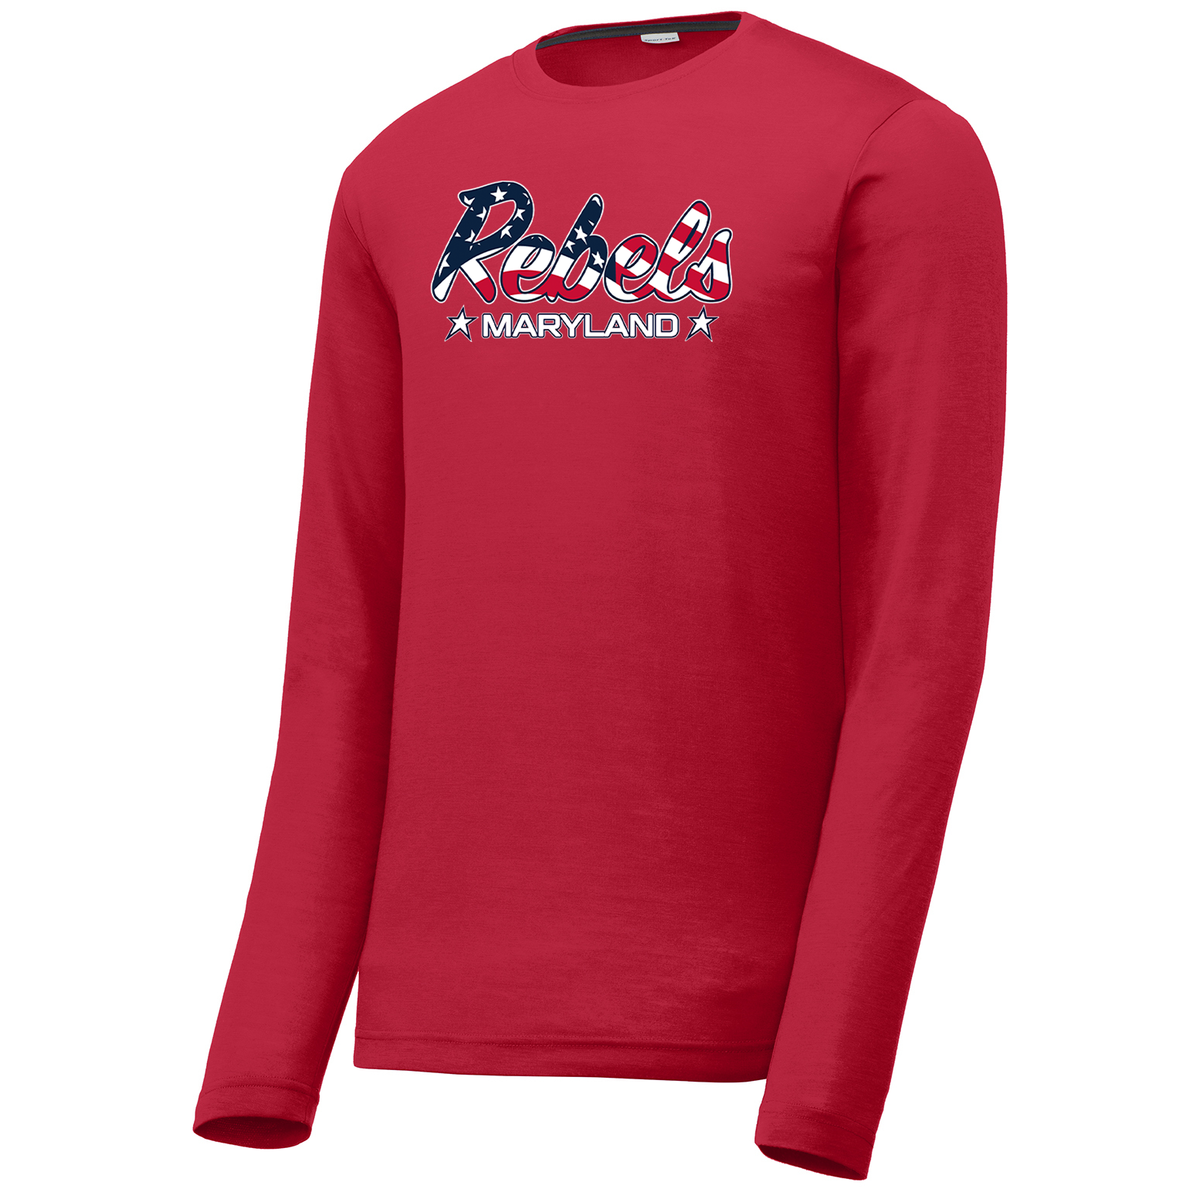 Rebels Maryland Long Sleeve CottonTouch Performance Shirt